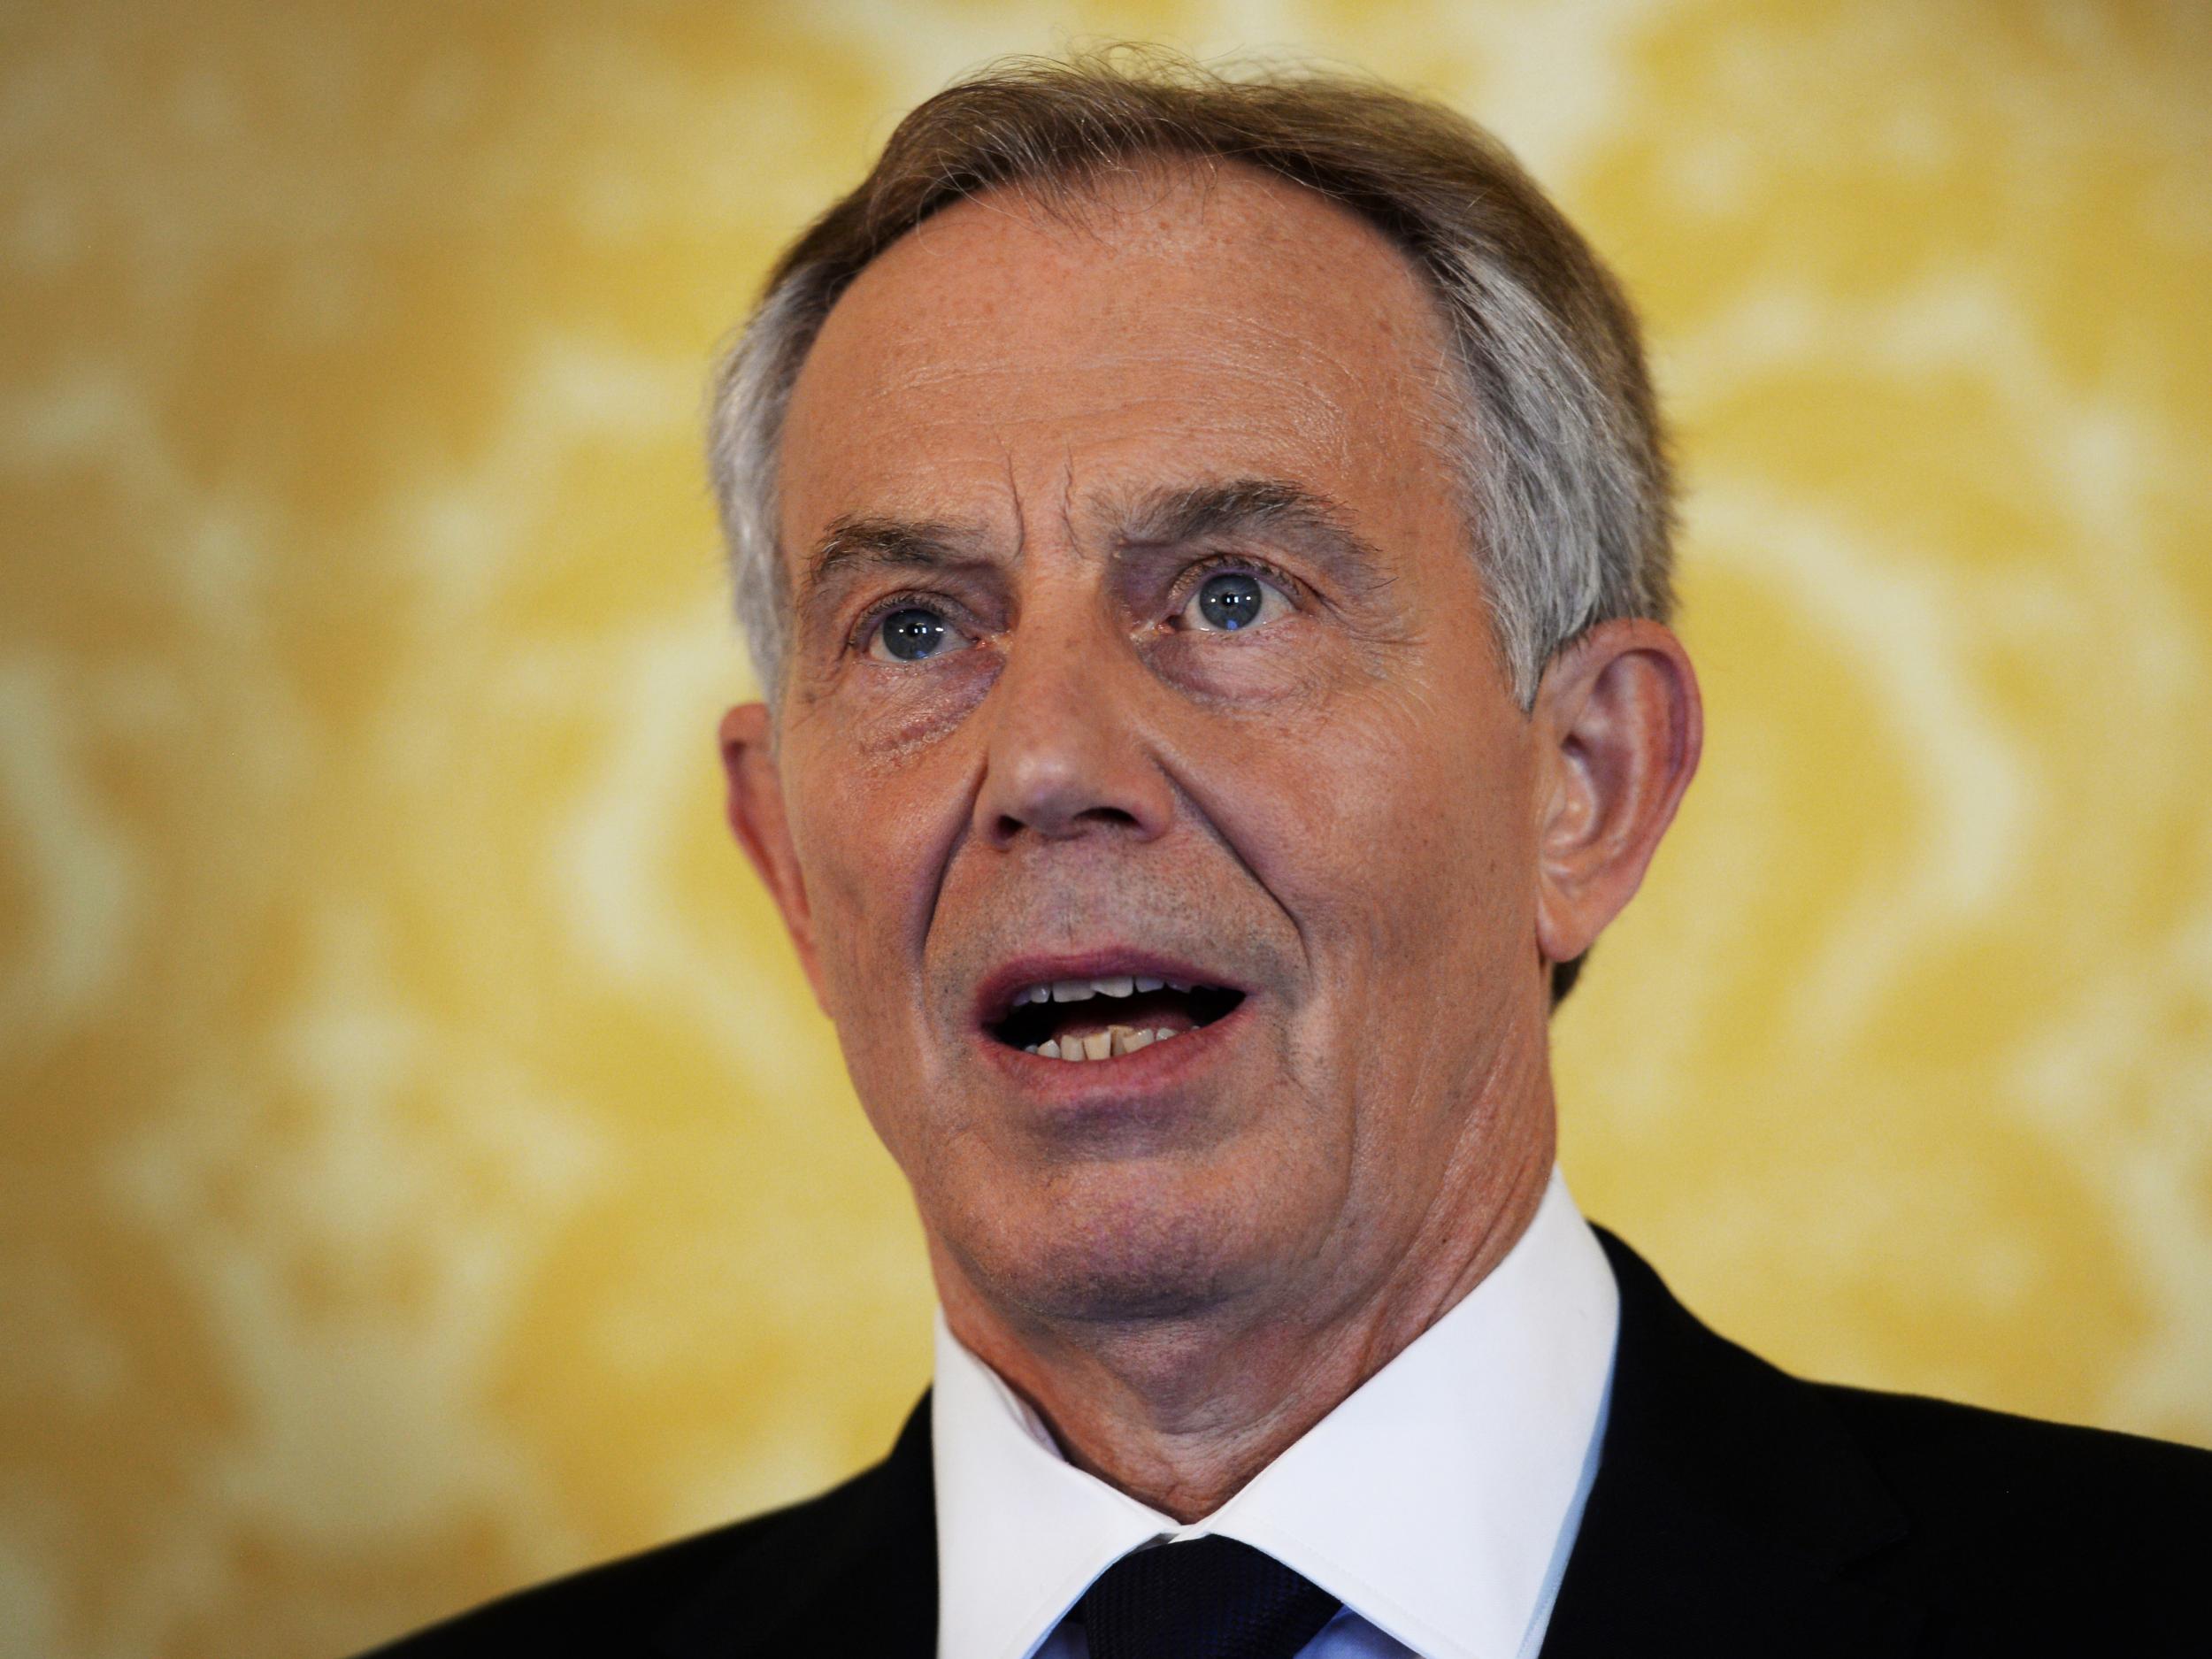 The former Prime Minister has not ruled out a return to front-line politics